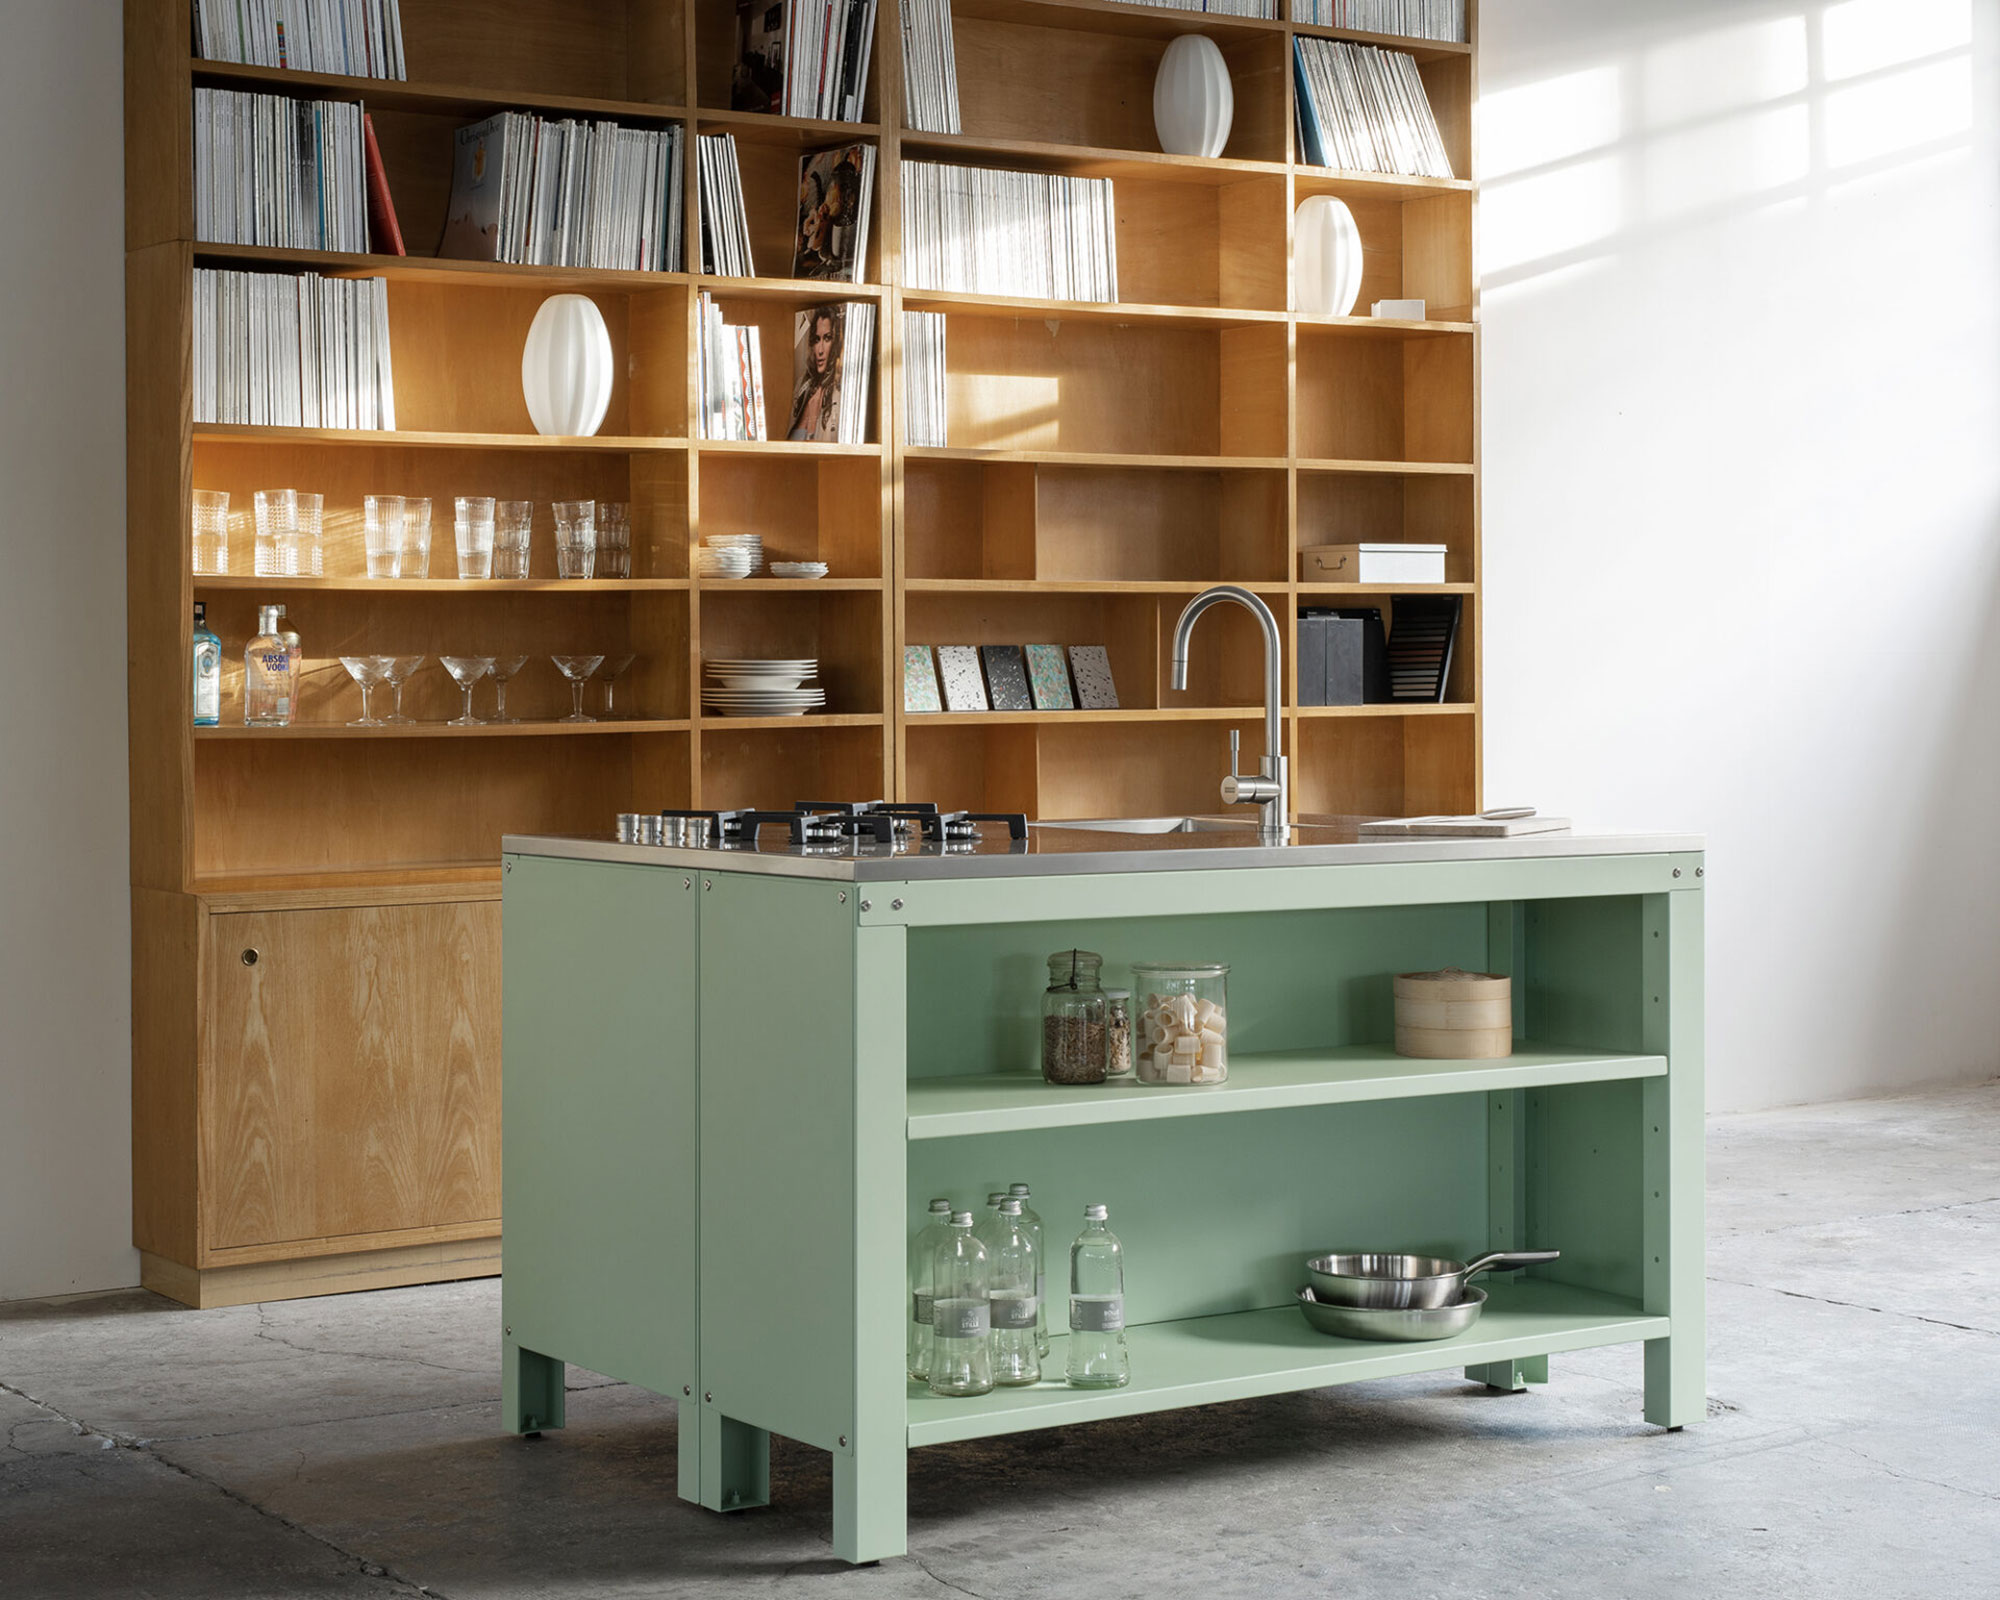 Introducing the Very Simple Kitchen - Gessato